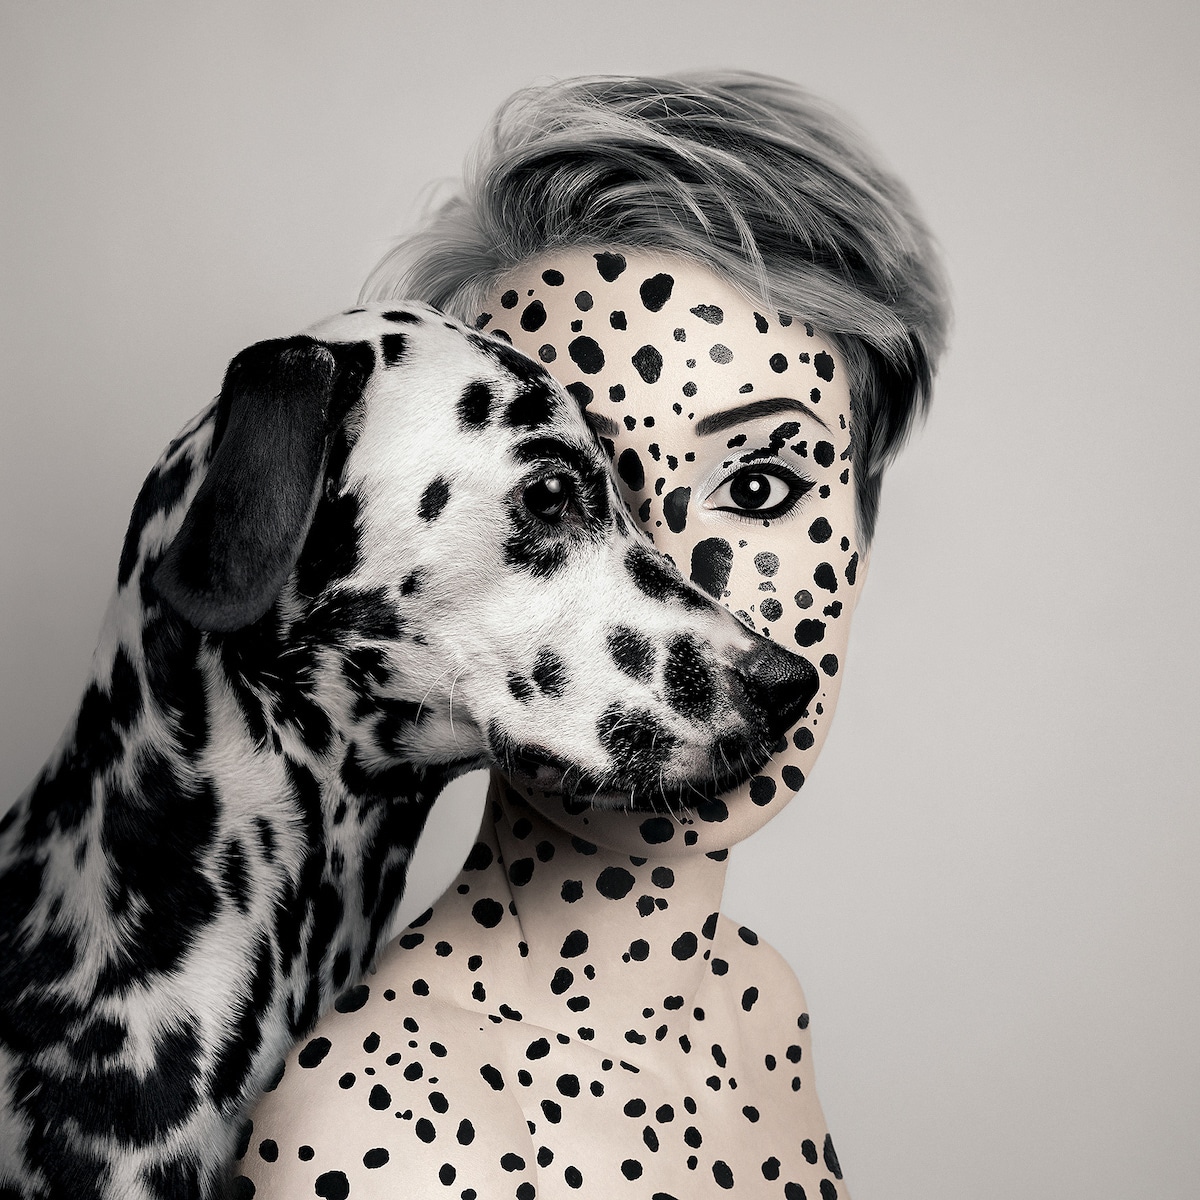 Unique Self Portrait by Flora Borsi Sharing an Eye with a Dog